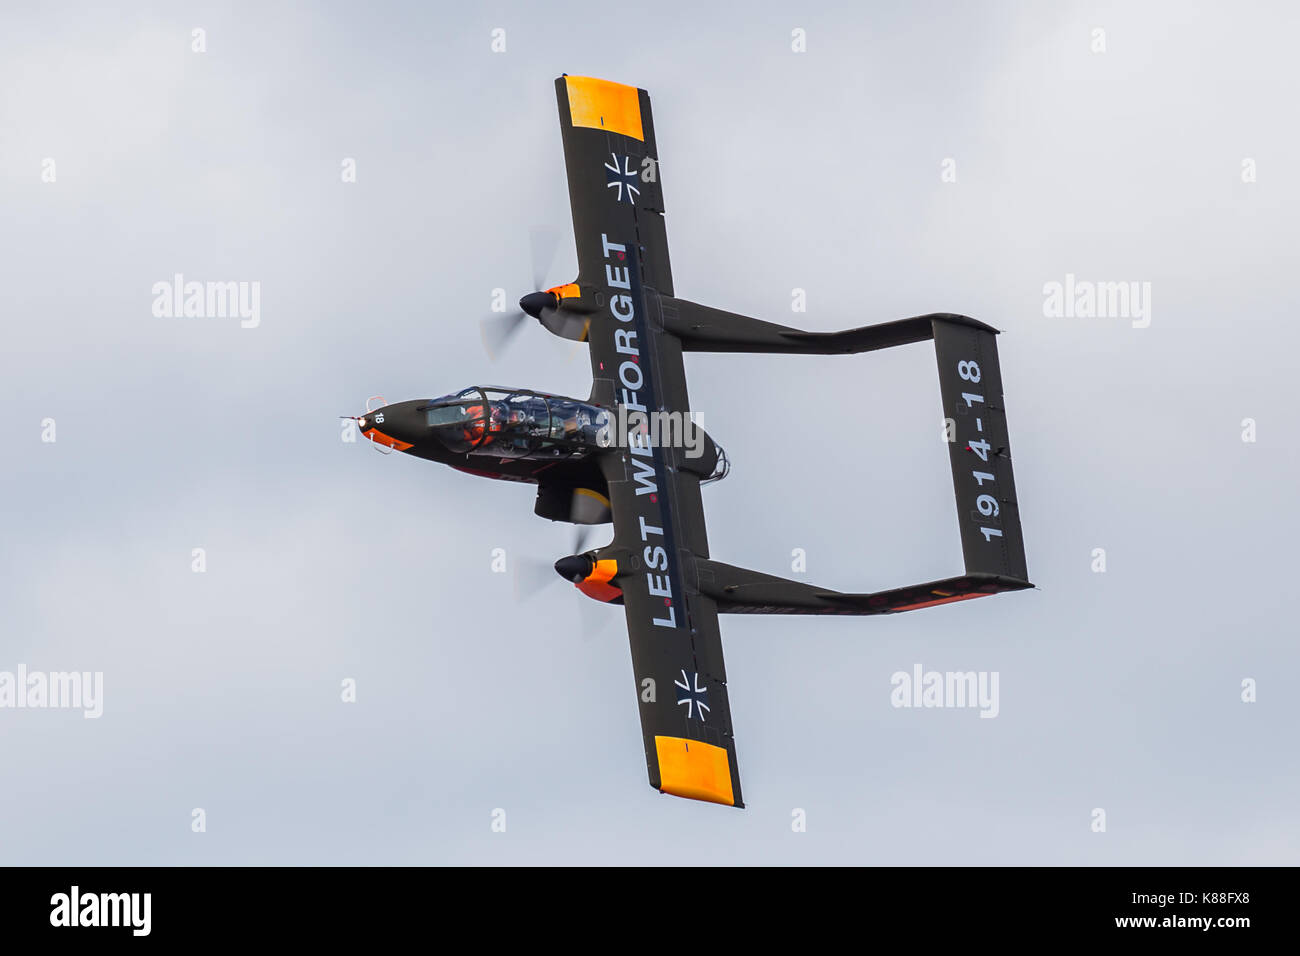 A topside pass by the  North American Aviation Rockwell OV-10 Bronco at the Southport airshow in the early autumn of 2017. Stock Photo